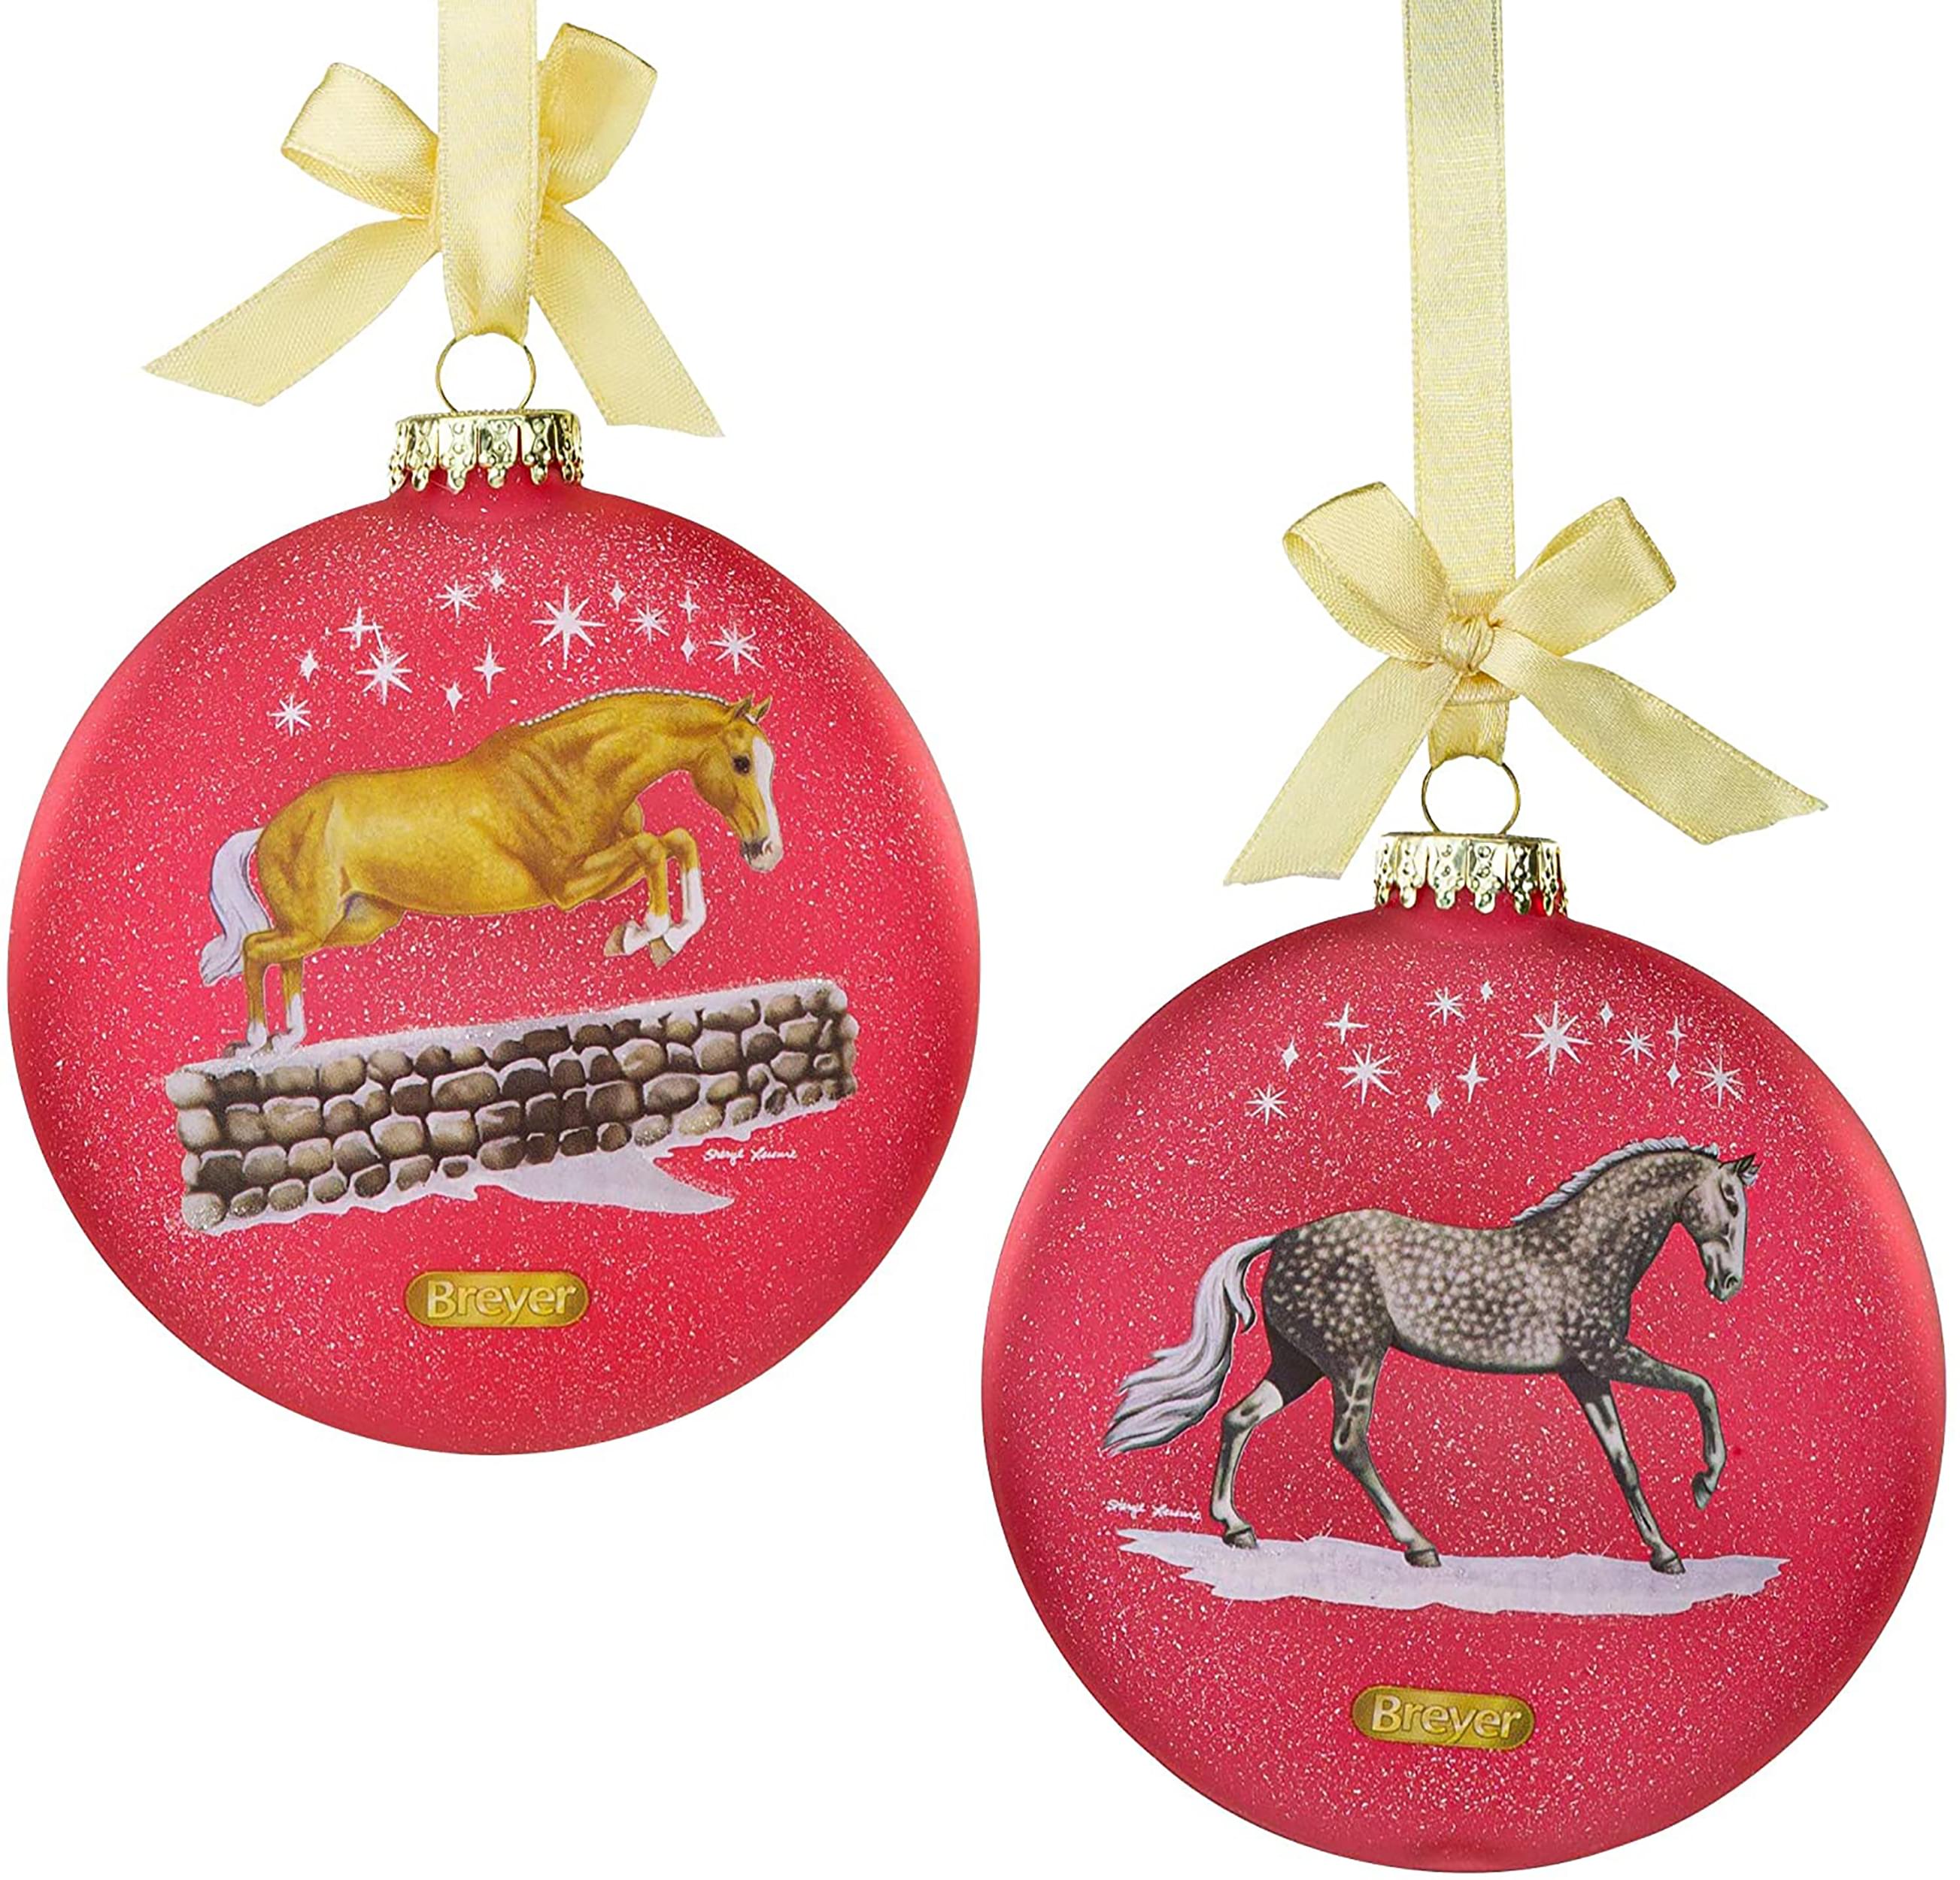 Breyer 2021 Artist Signature Holiday Ornament , Thoroughbred And Warmblood